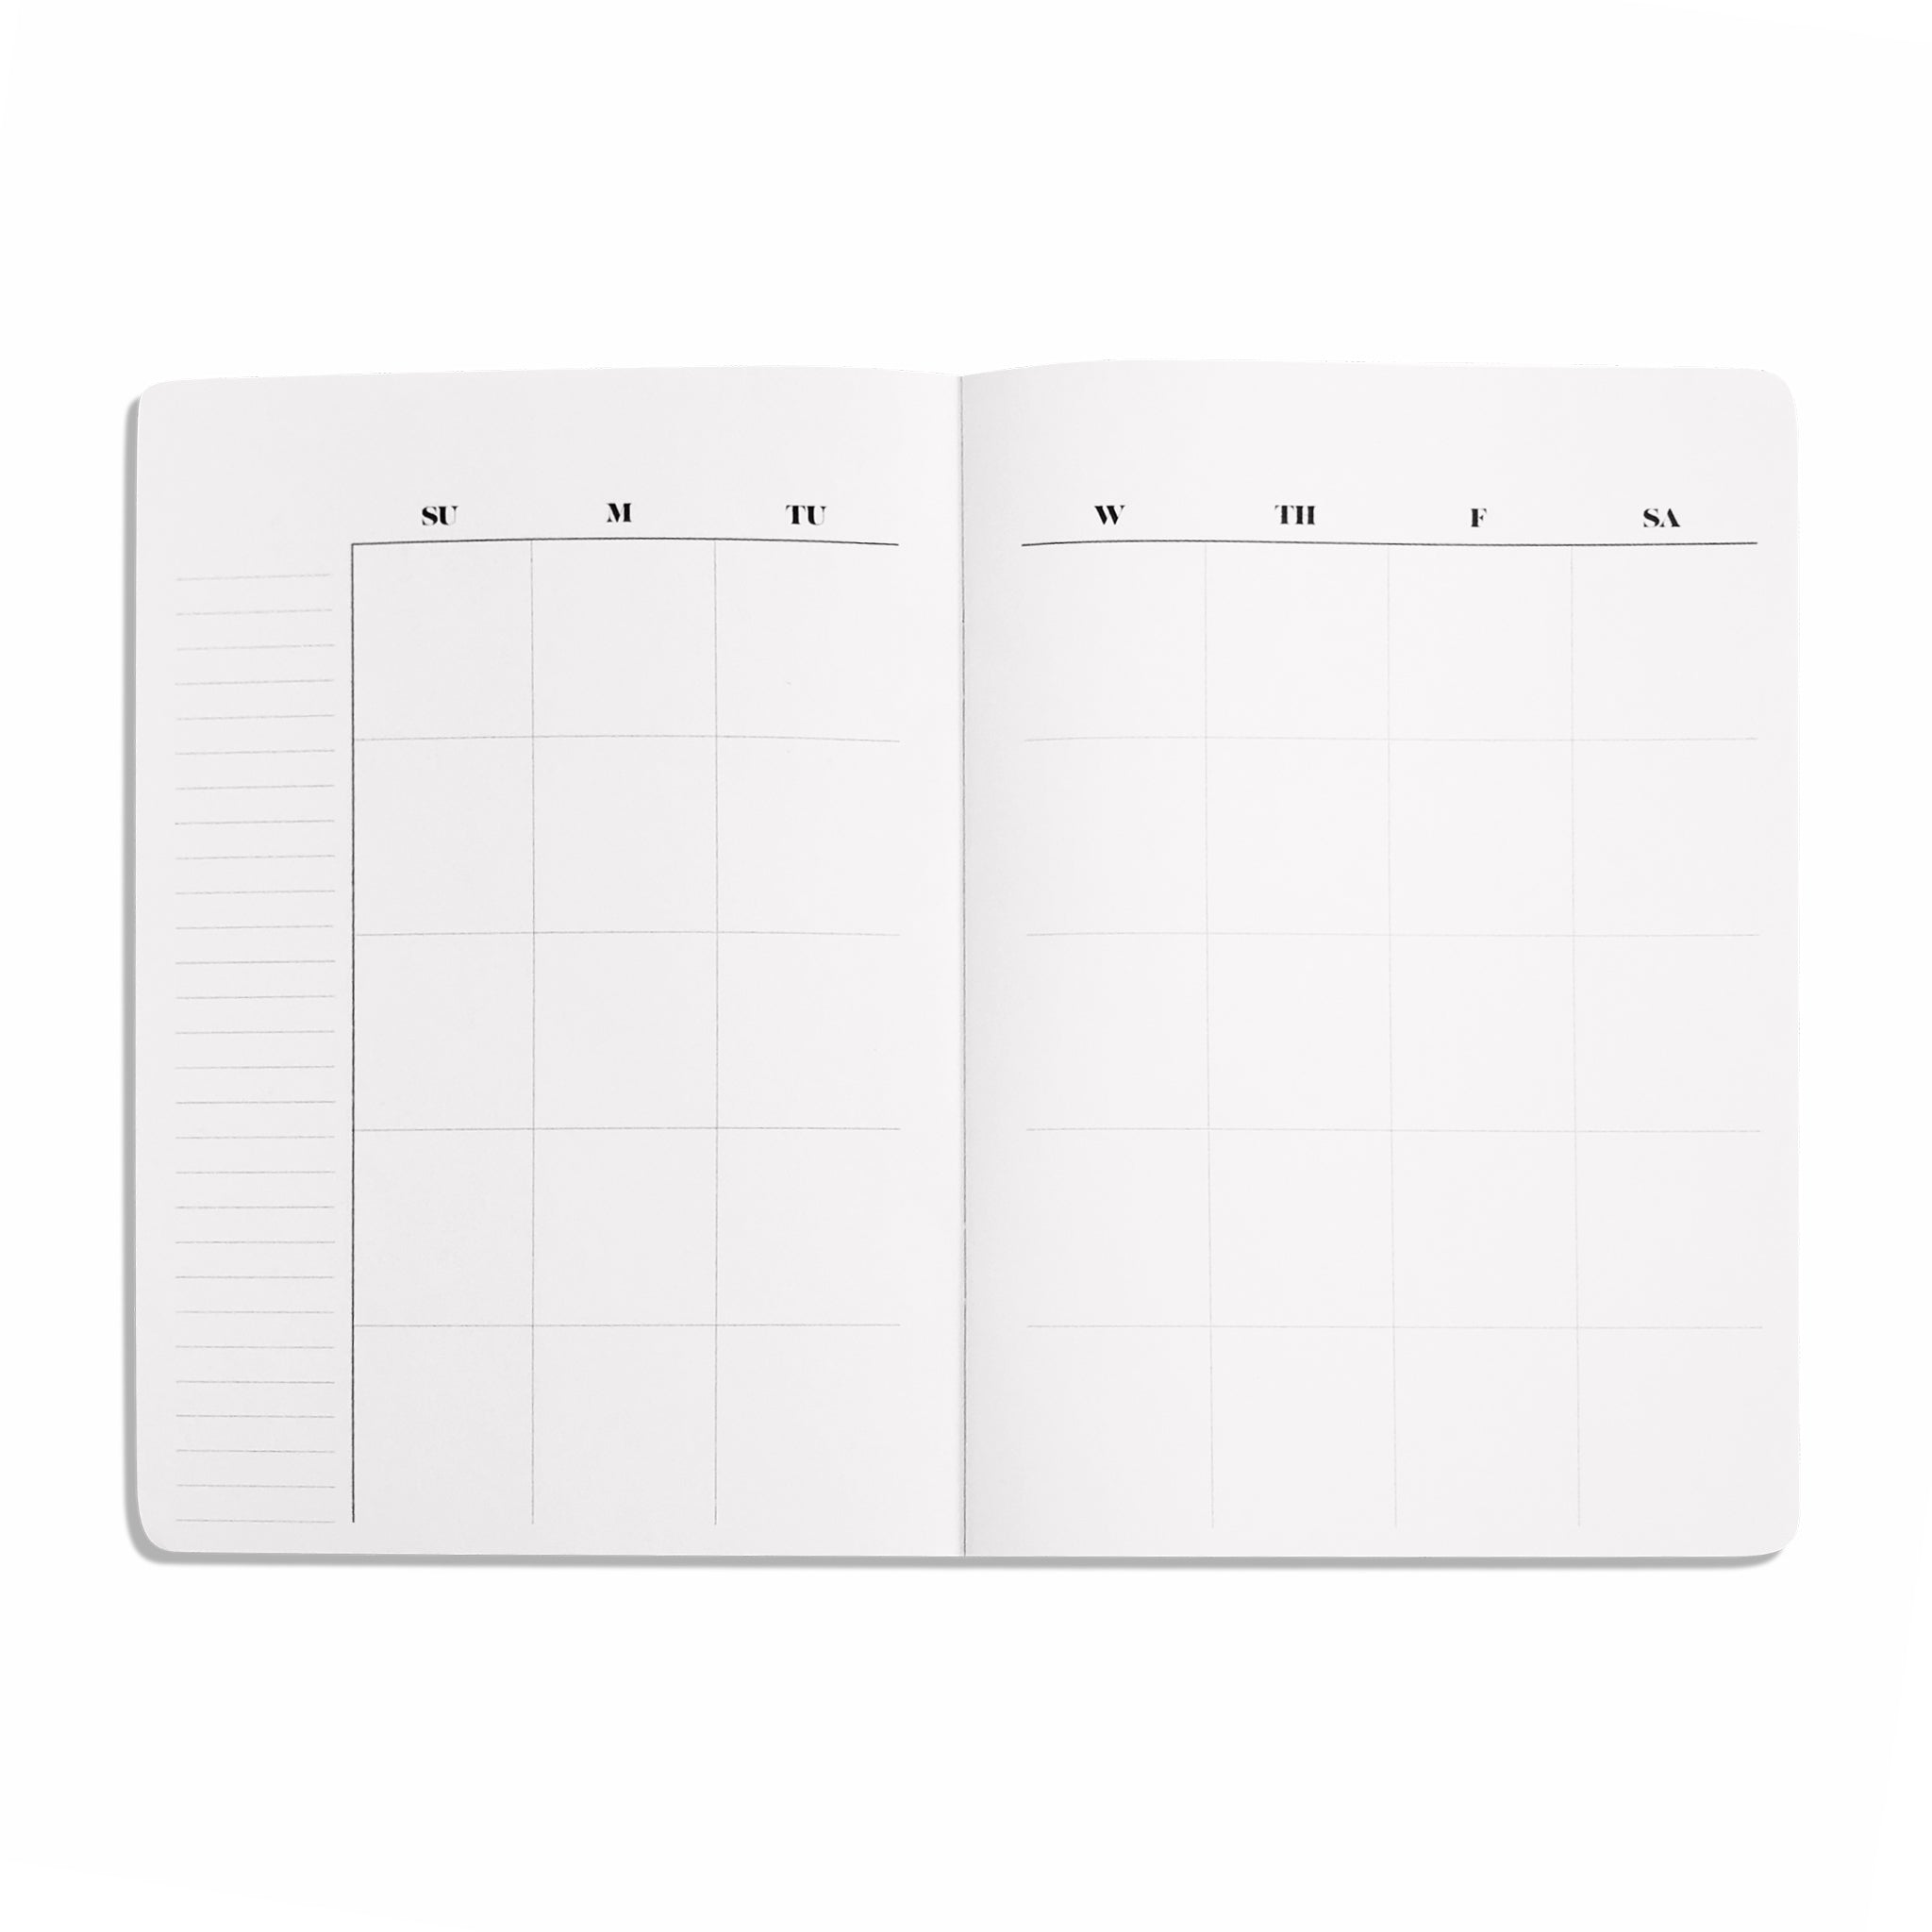 LE Khaki Black Cover Notebook Blank Paper Daily Writing Planner